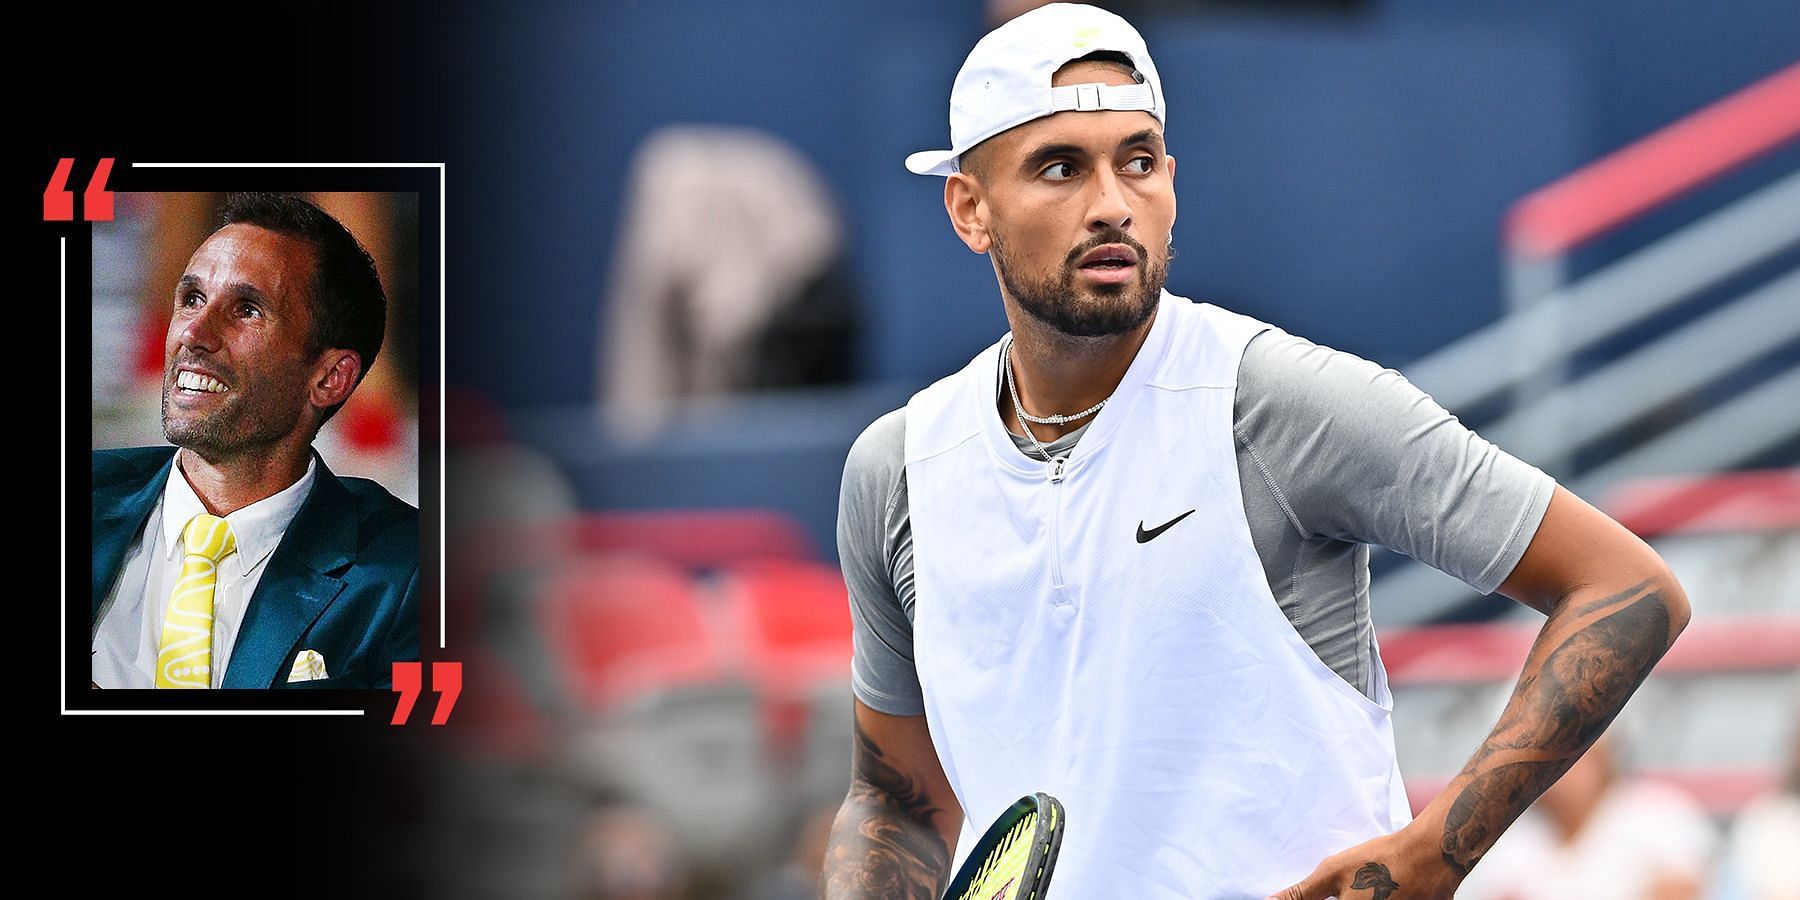 Nick Kyrgios will open his US Open campaign against compatriot Thanasi Kokkinakis.